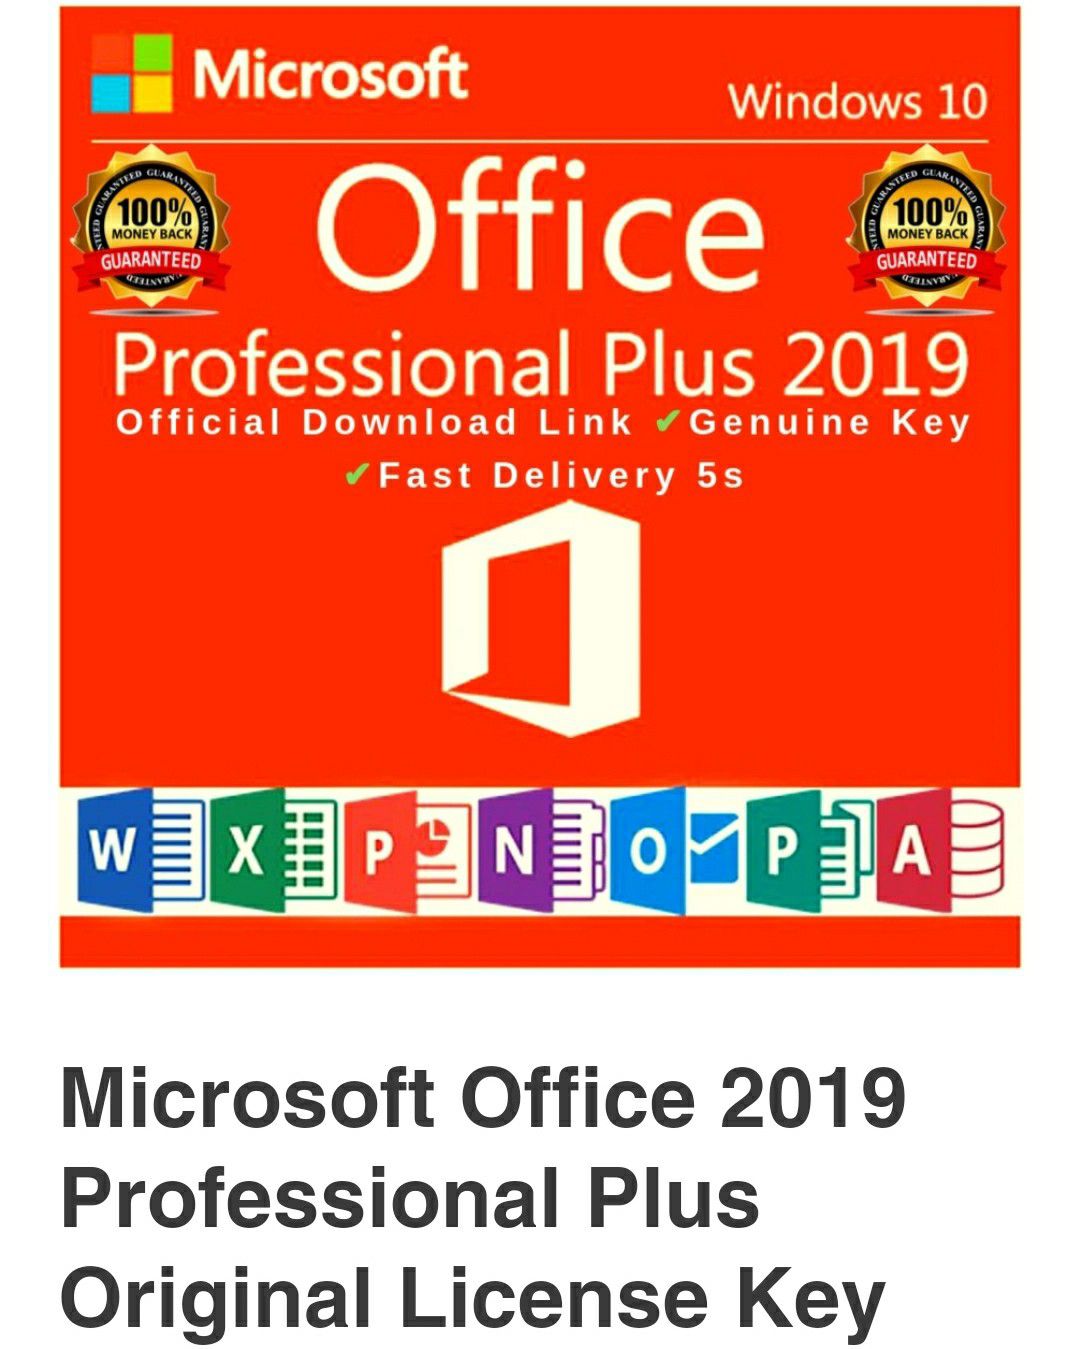 Microsoft Office 2019 Professional for laptop and desktop computers